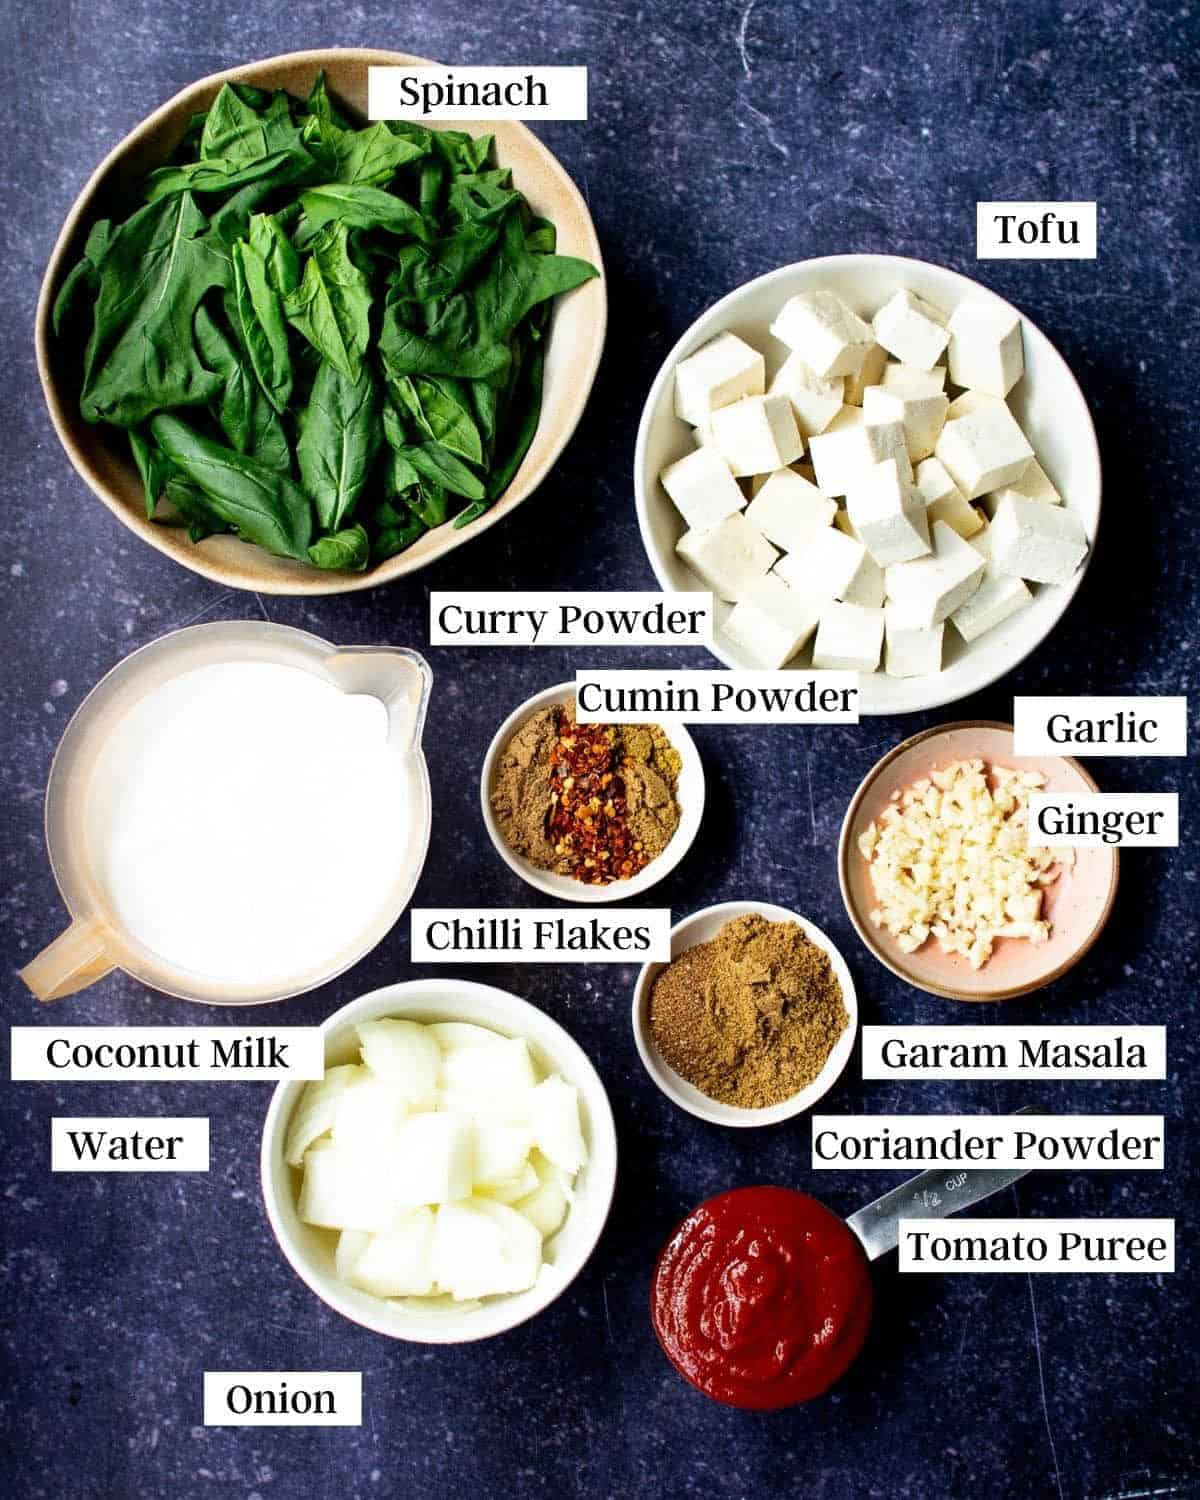 Ingredients for vegan palak tofu laid out on a blue background with labels by each item.